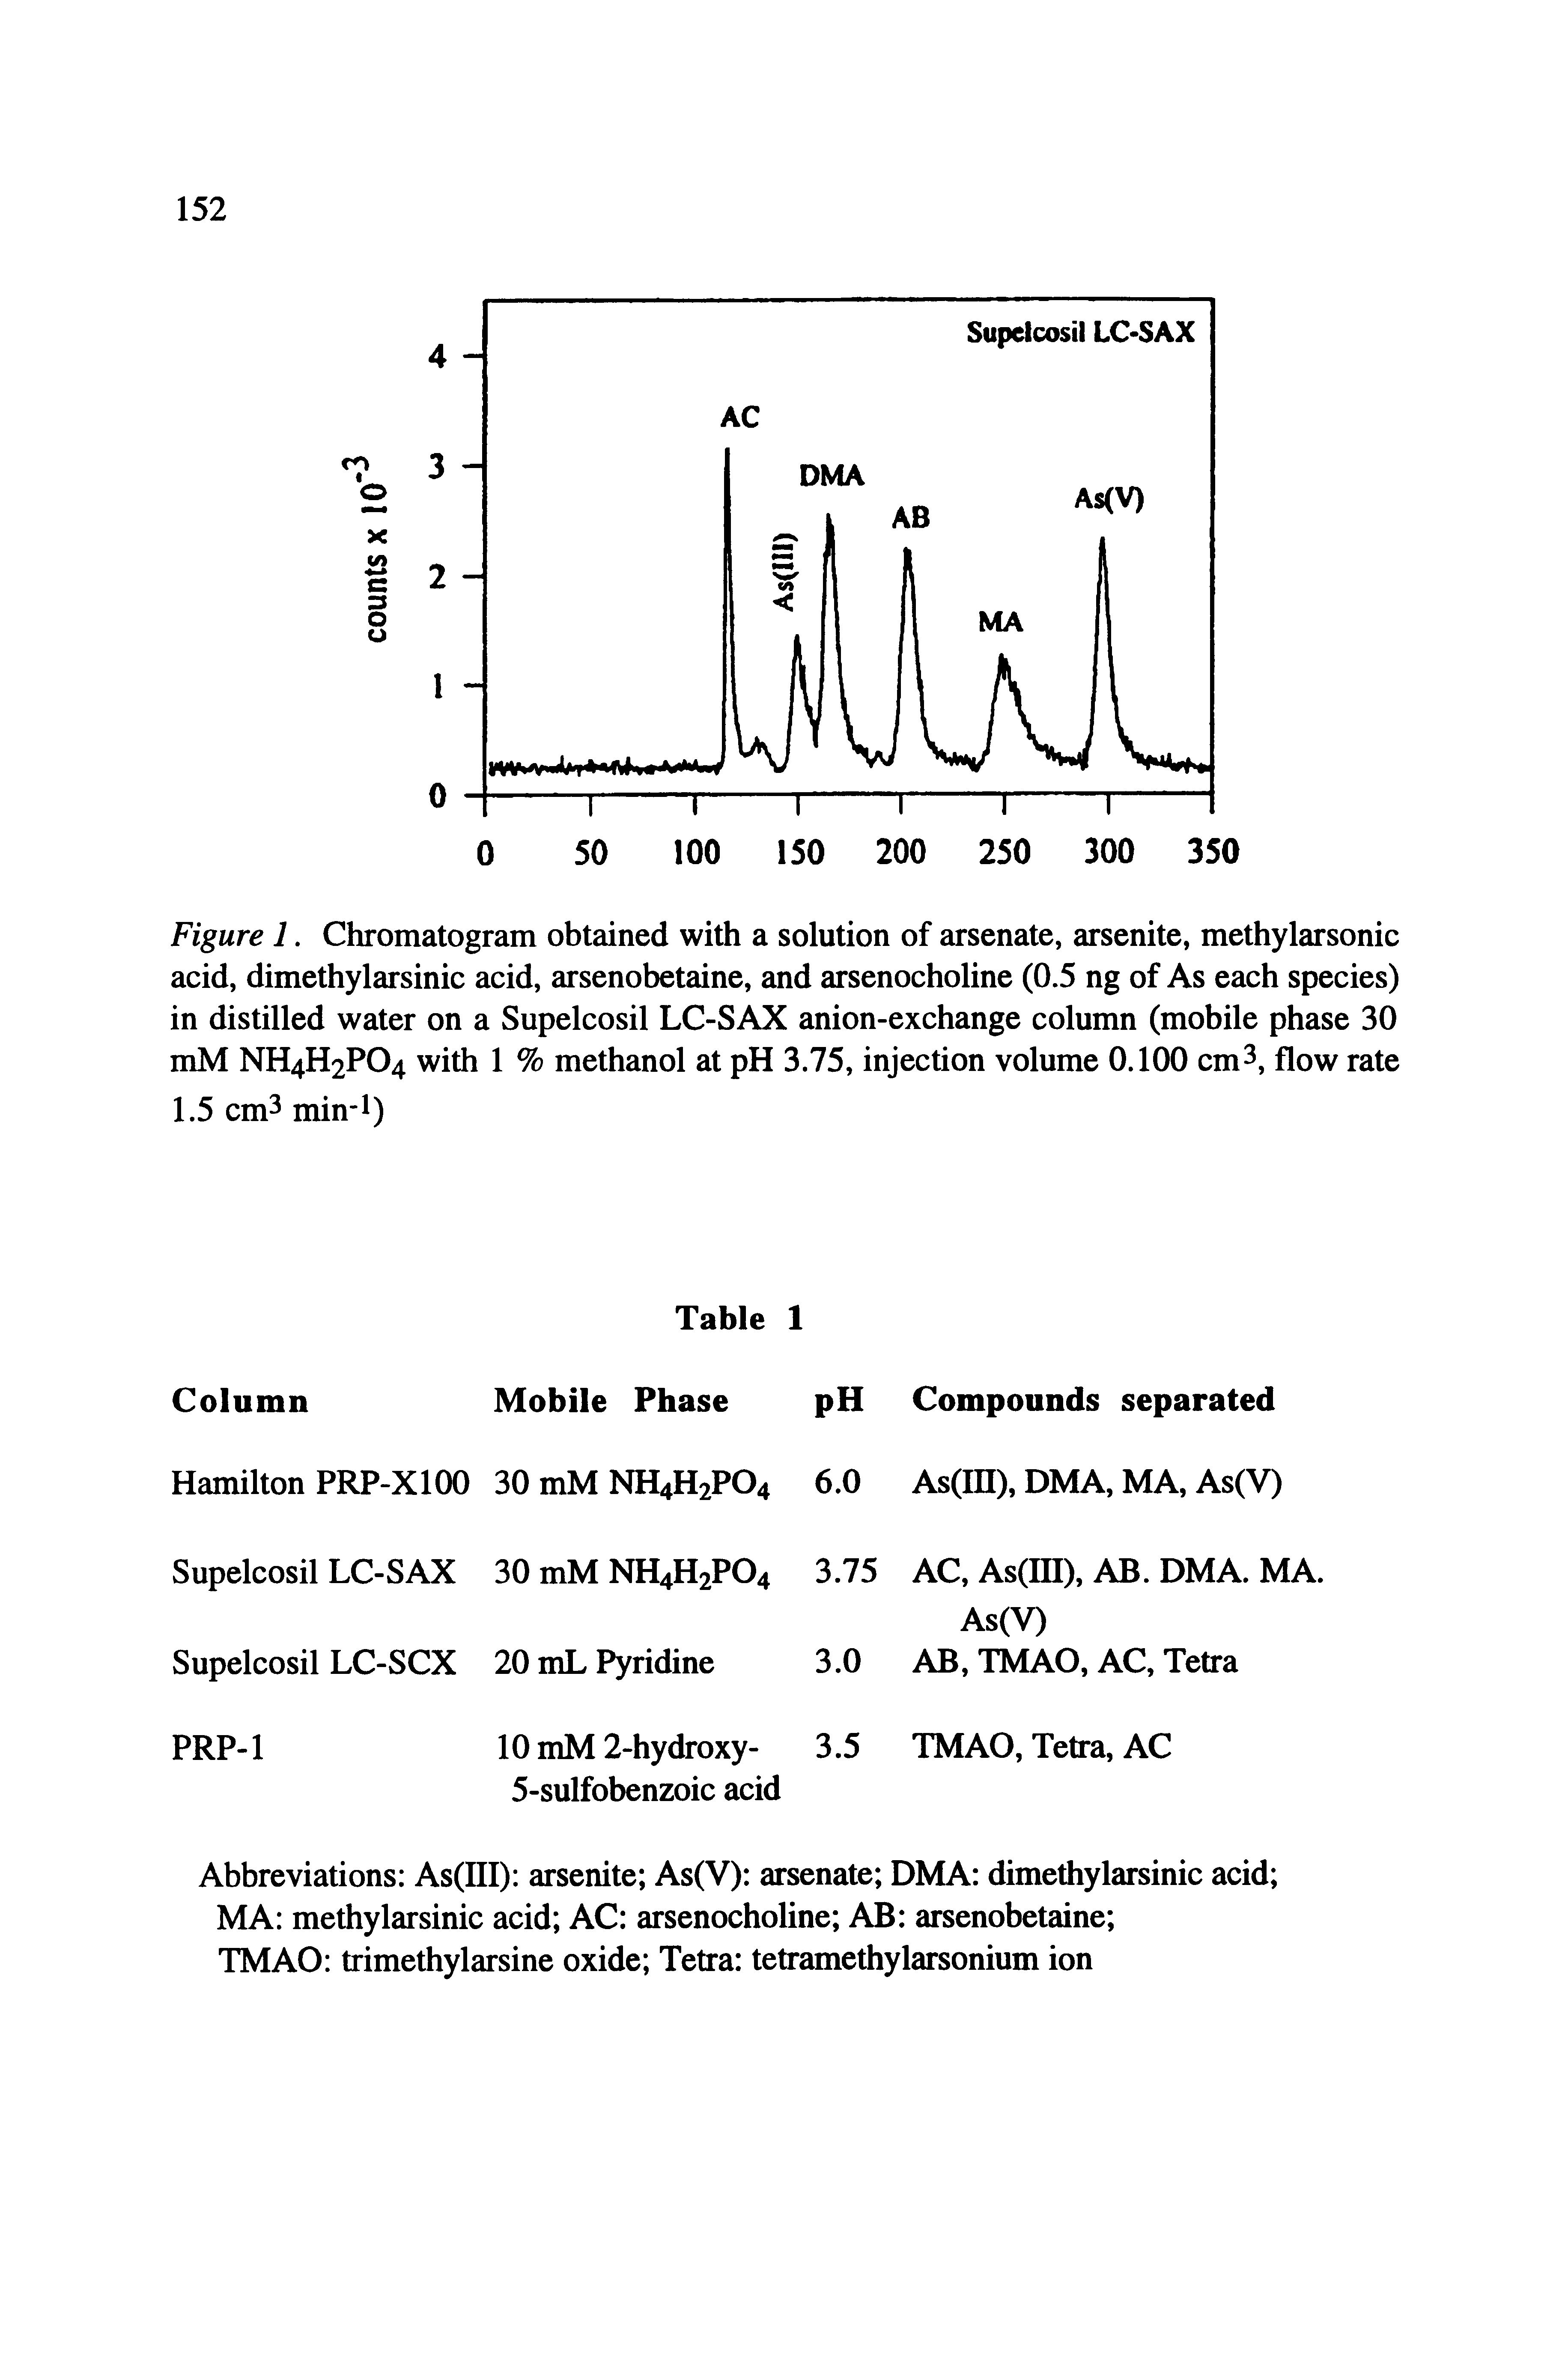 Figure 1. Chromatogram obtained with a solution of arsenate, arsenite, methylarsonic acid, dimethylarsinic acid, arsenobetaine, and arsenocholine (0.5 ng of As each species) in distilled water on a Supelcosil LC-SAX anion-exchange column (mobile phase 30 mM NH4H2PO4 with 1 % methanol at pH 3.75, injection volume 0.100 cm3, flow rate 1.5 cm3 min-l)...